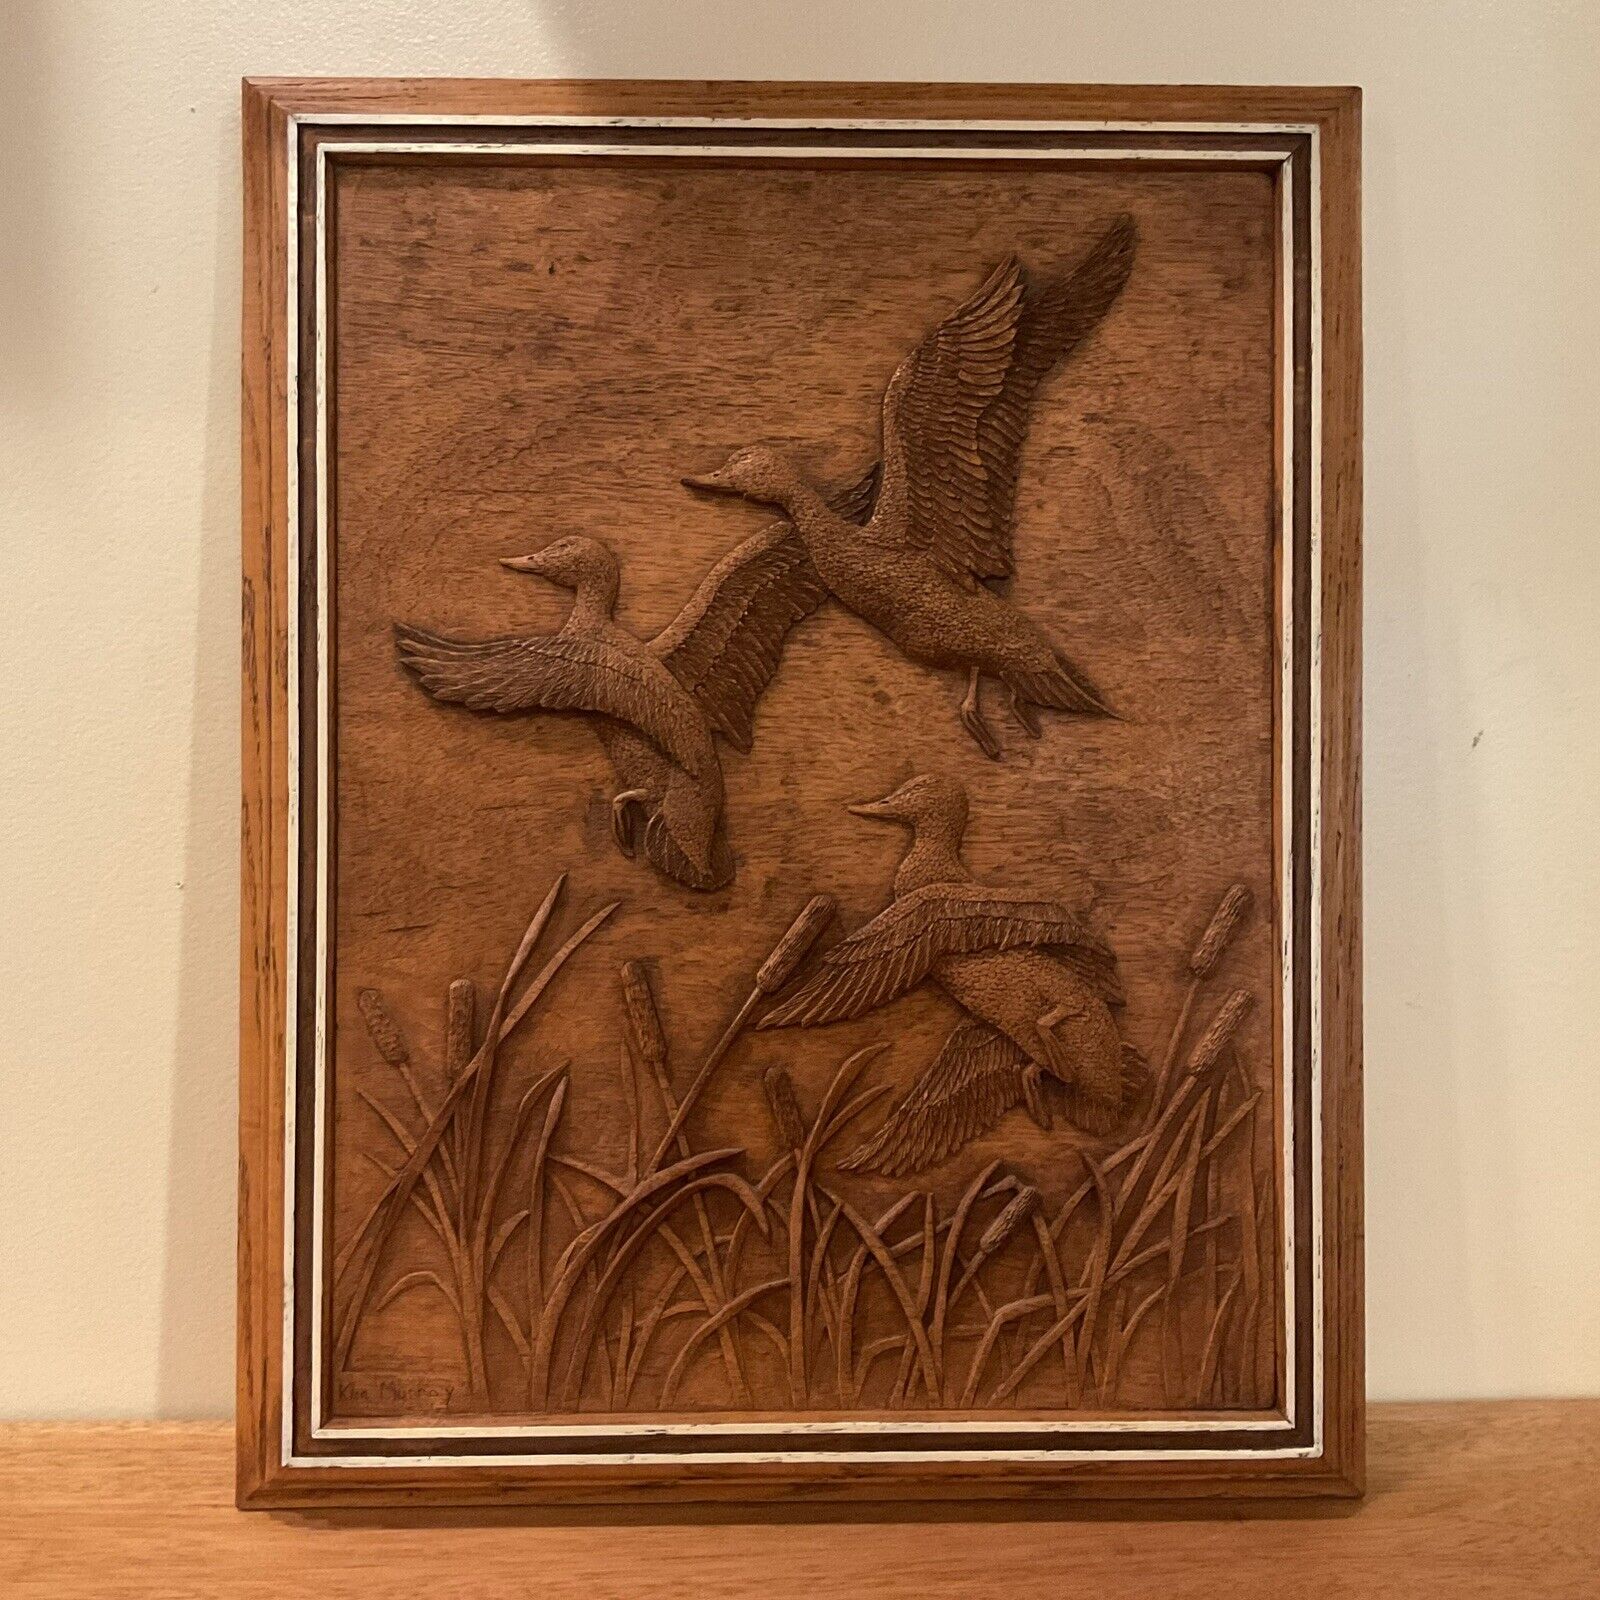 Vintage Kim Murray Wood Carving Picture.   Wild Ducks In Marsh  14.75 W 18.5 H